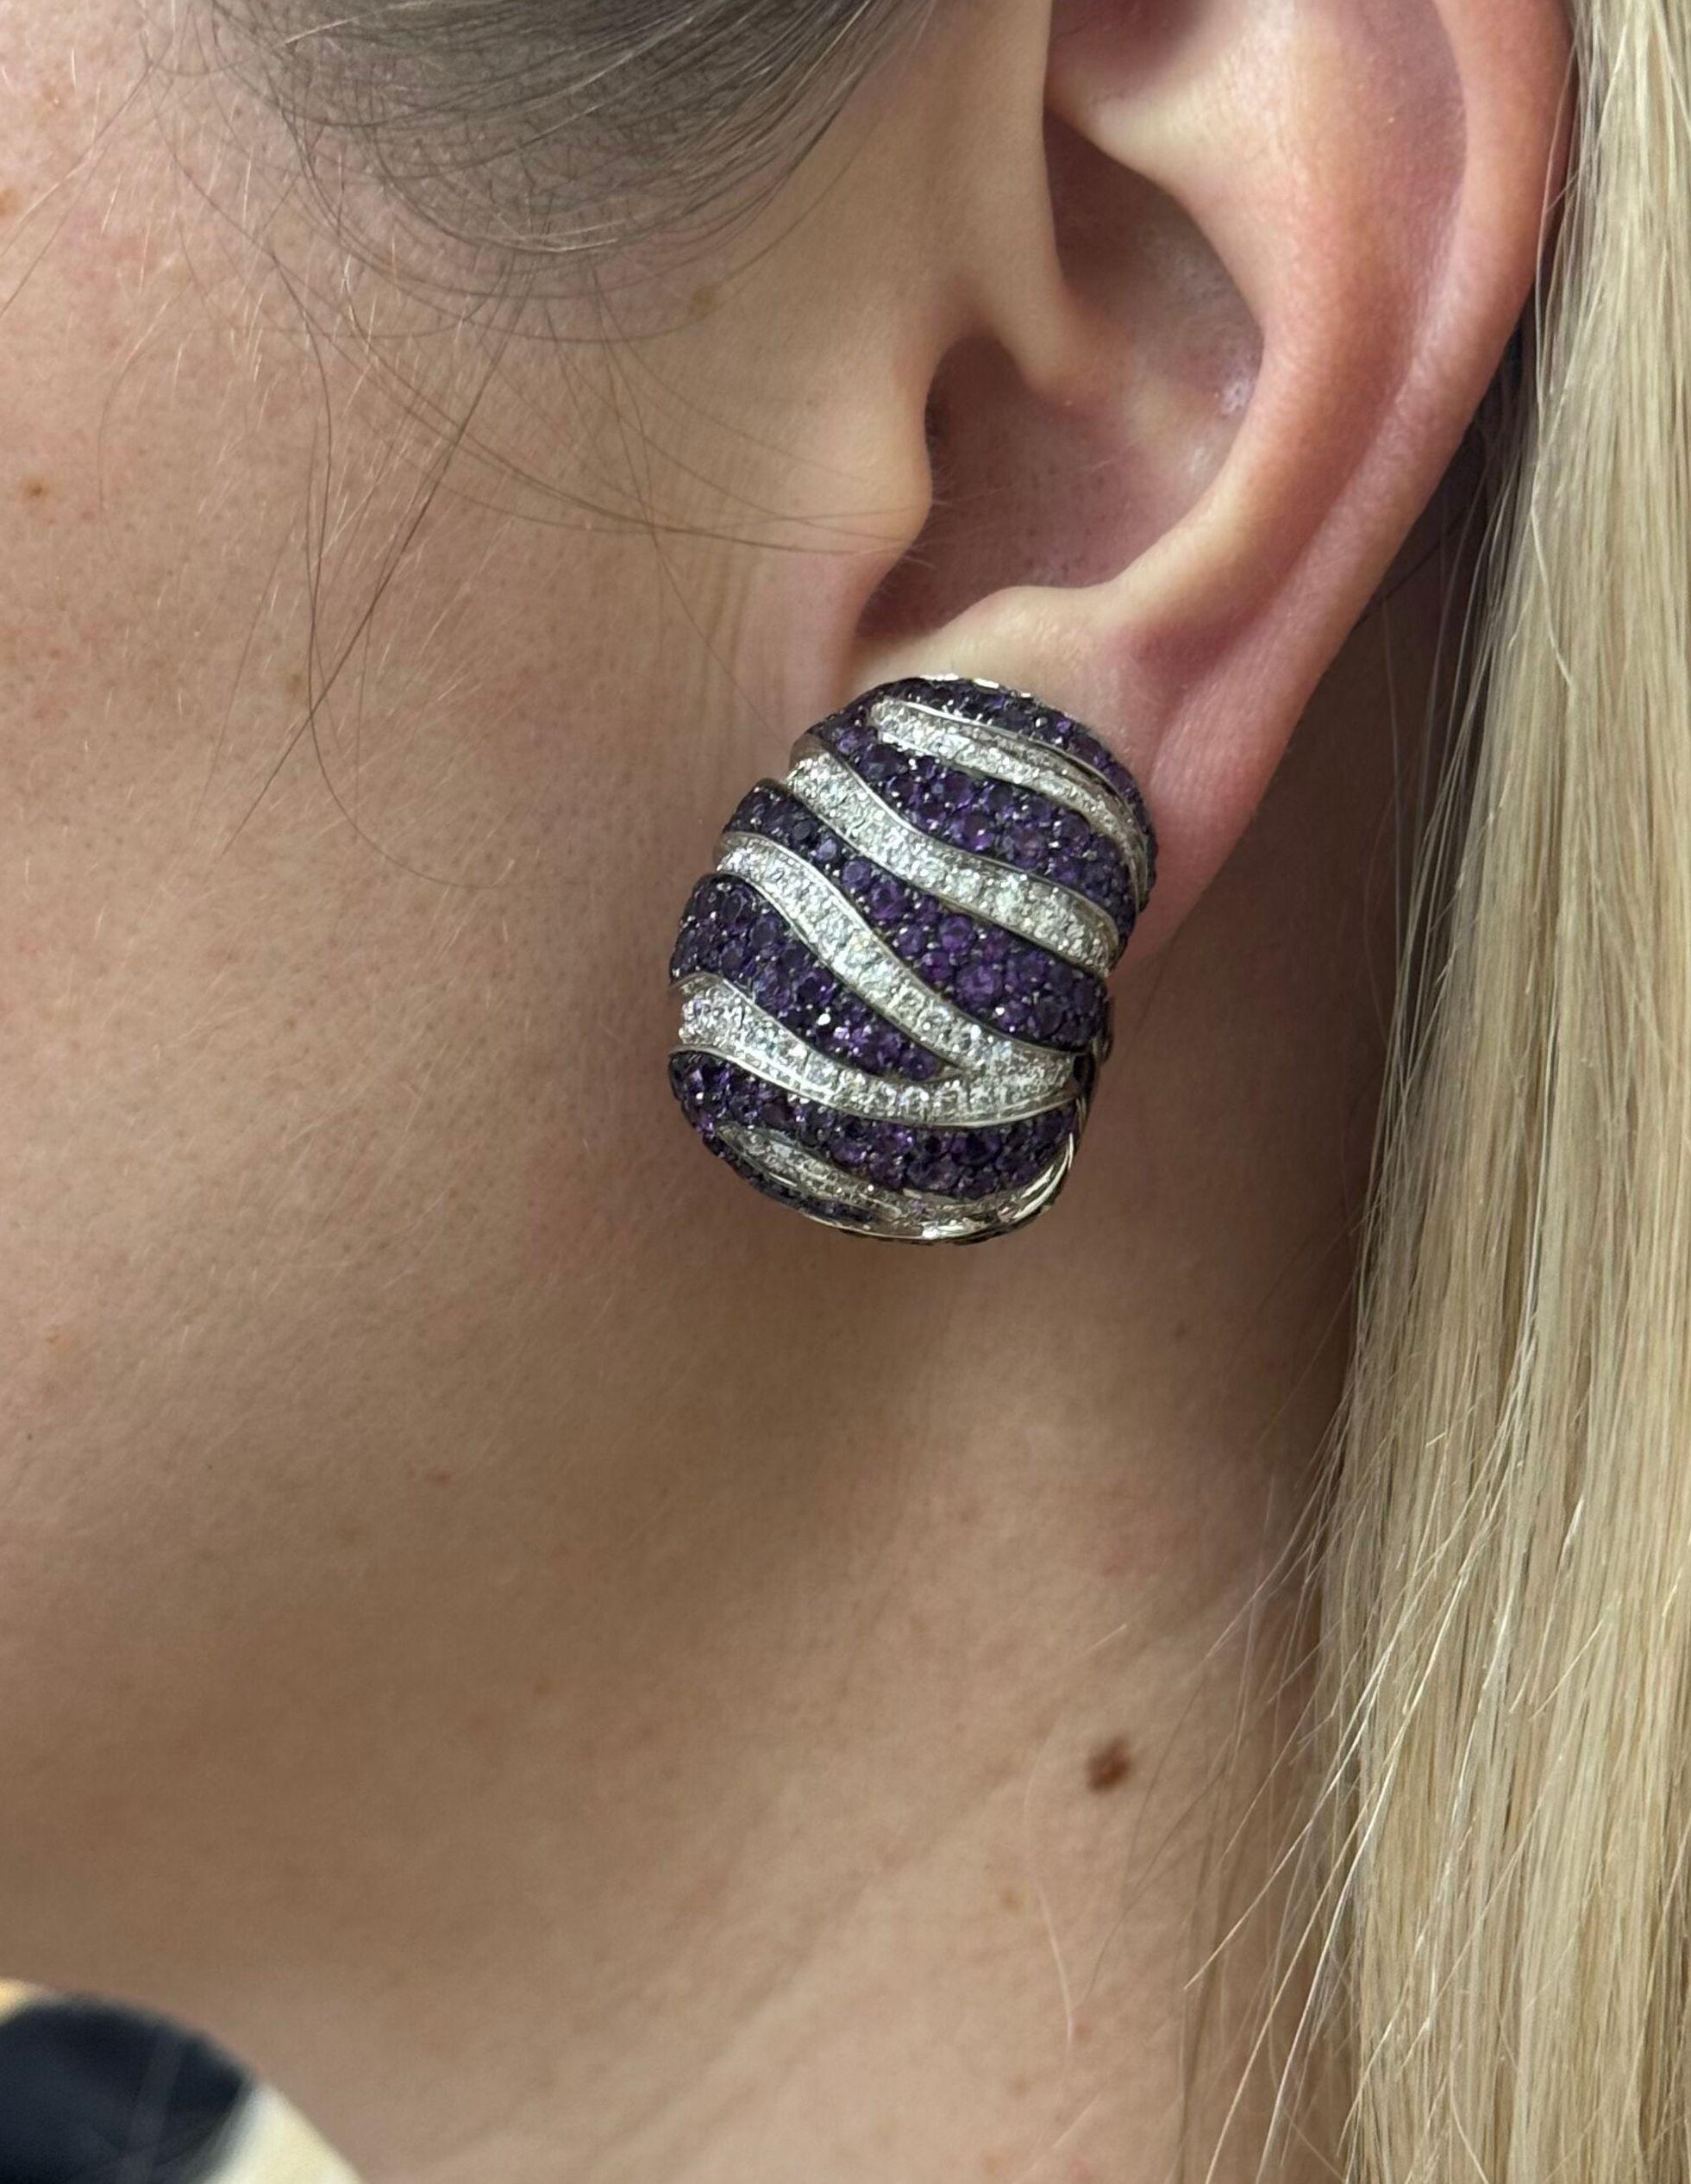 Pair of large and impressive Zebra earrings by de Grisogono, in 18k white gold, with amethyst and approx. 4.00ctw G/VS diamonds. The earrings have 5 missing amethysts. Earrings are 30mm x 23mm. Marked: de Grisogono, Geneve, B6657, B01394. Weight of